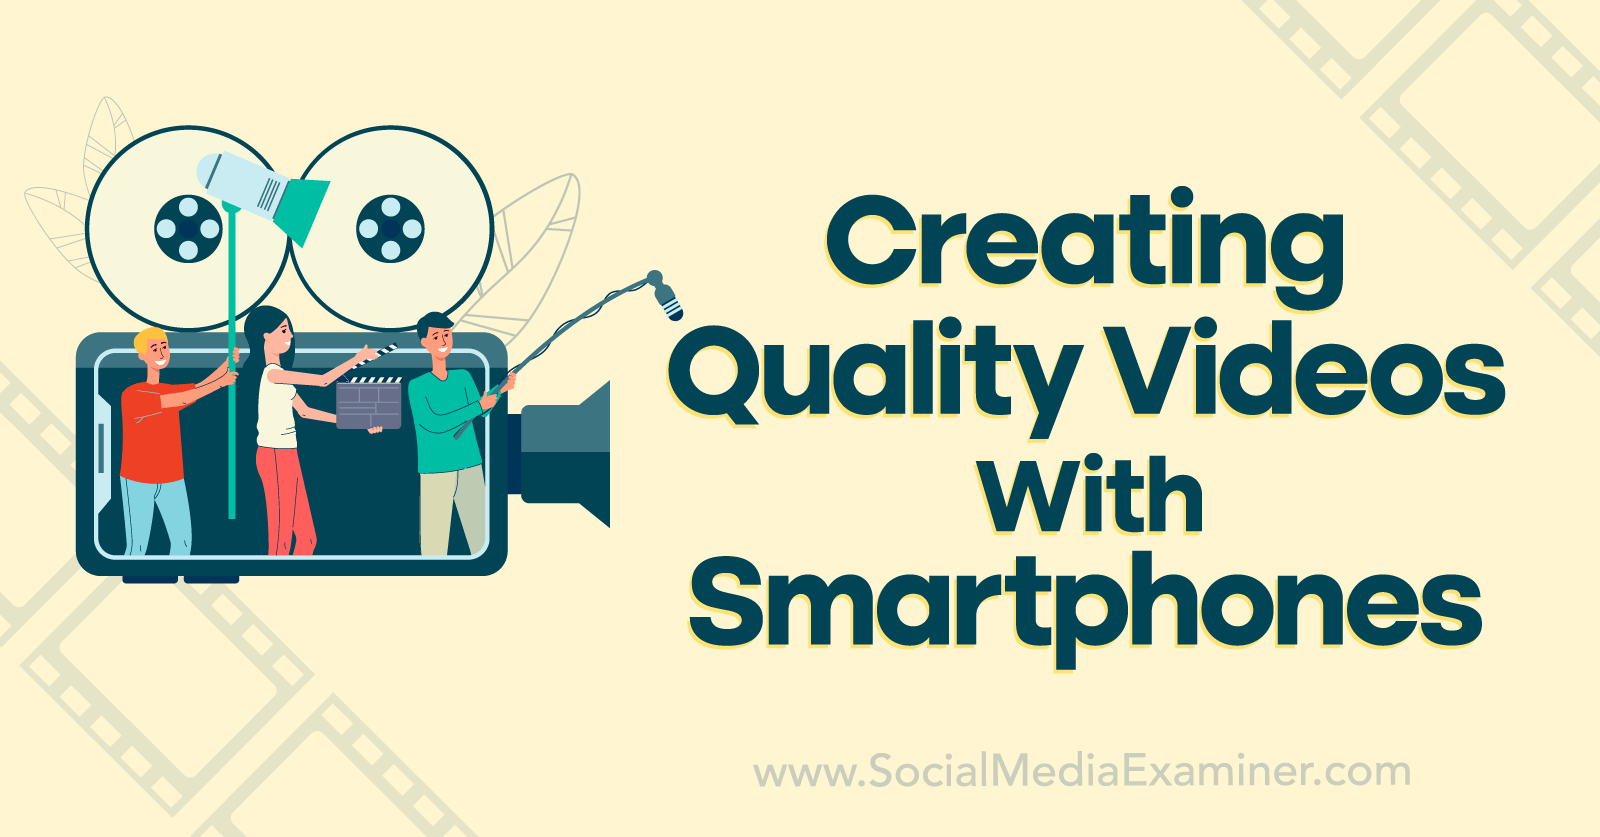 Creating Quality Videos With Smartphones-Social Media Examiner